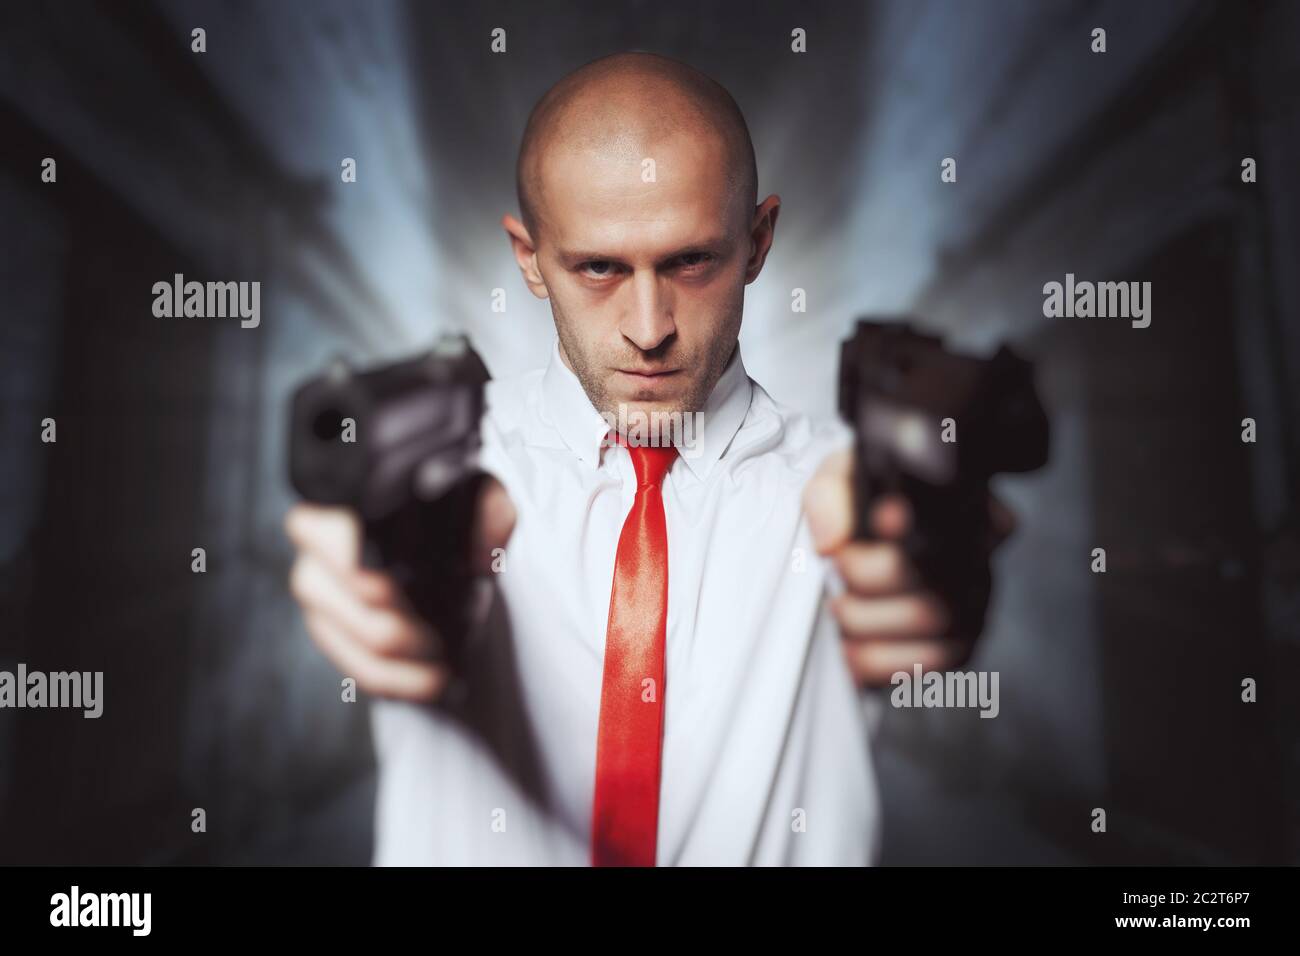 Bald killer in red tie aims with two pistols. Professional secret agent  concept. Assassin with guns, wallpaper, background or poster Stock Photo -  Alamy